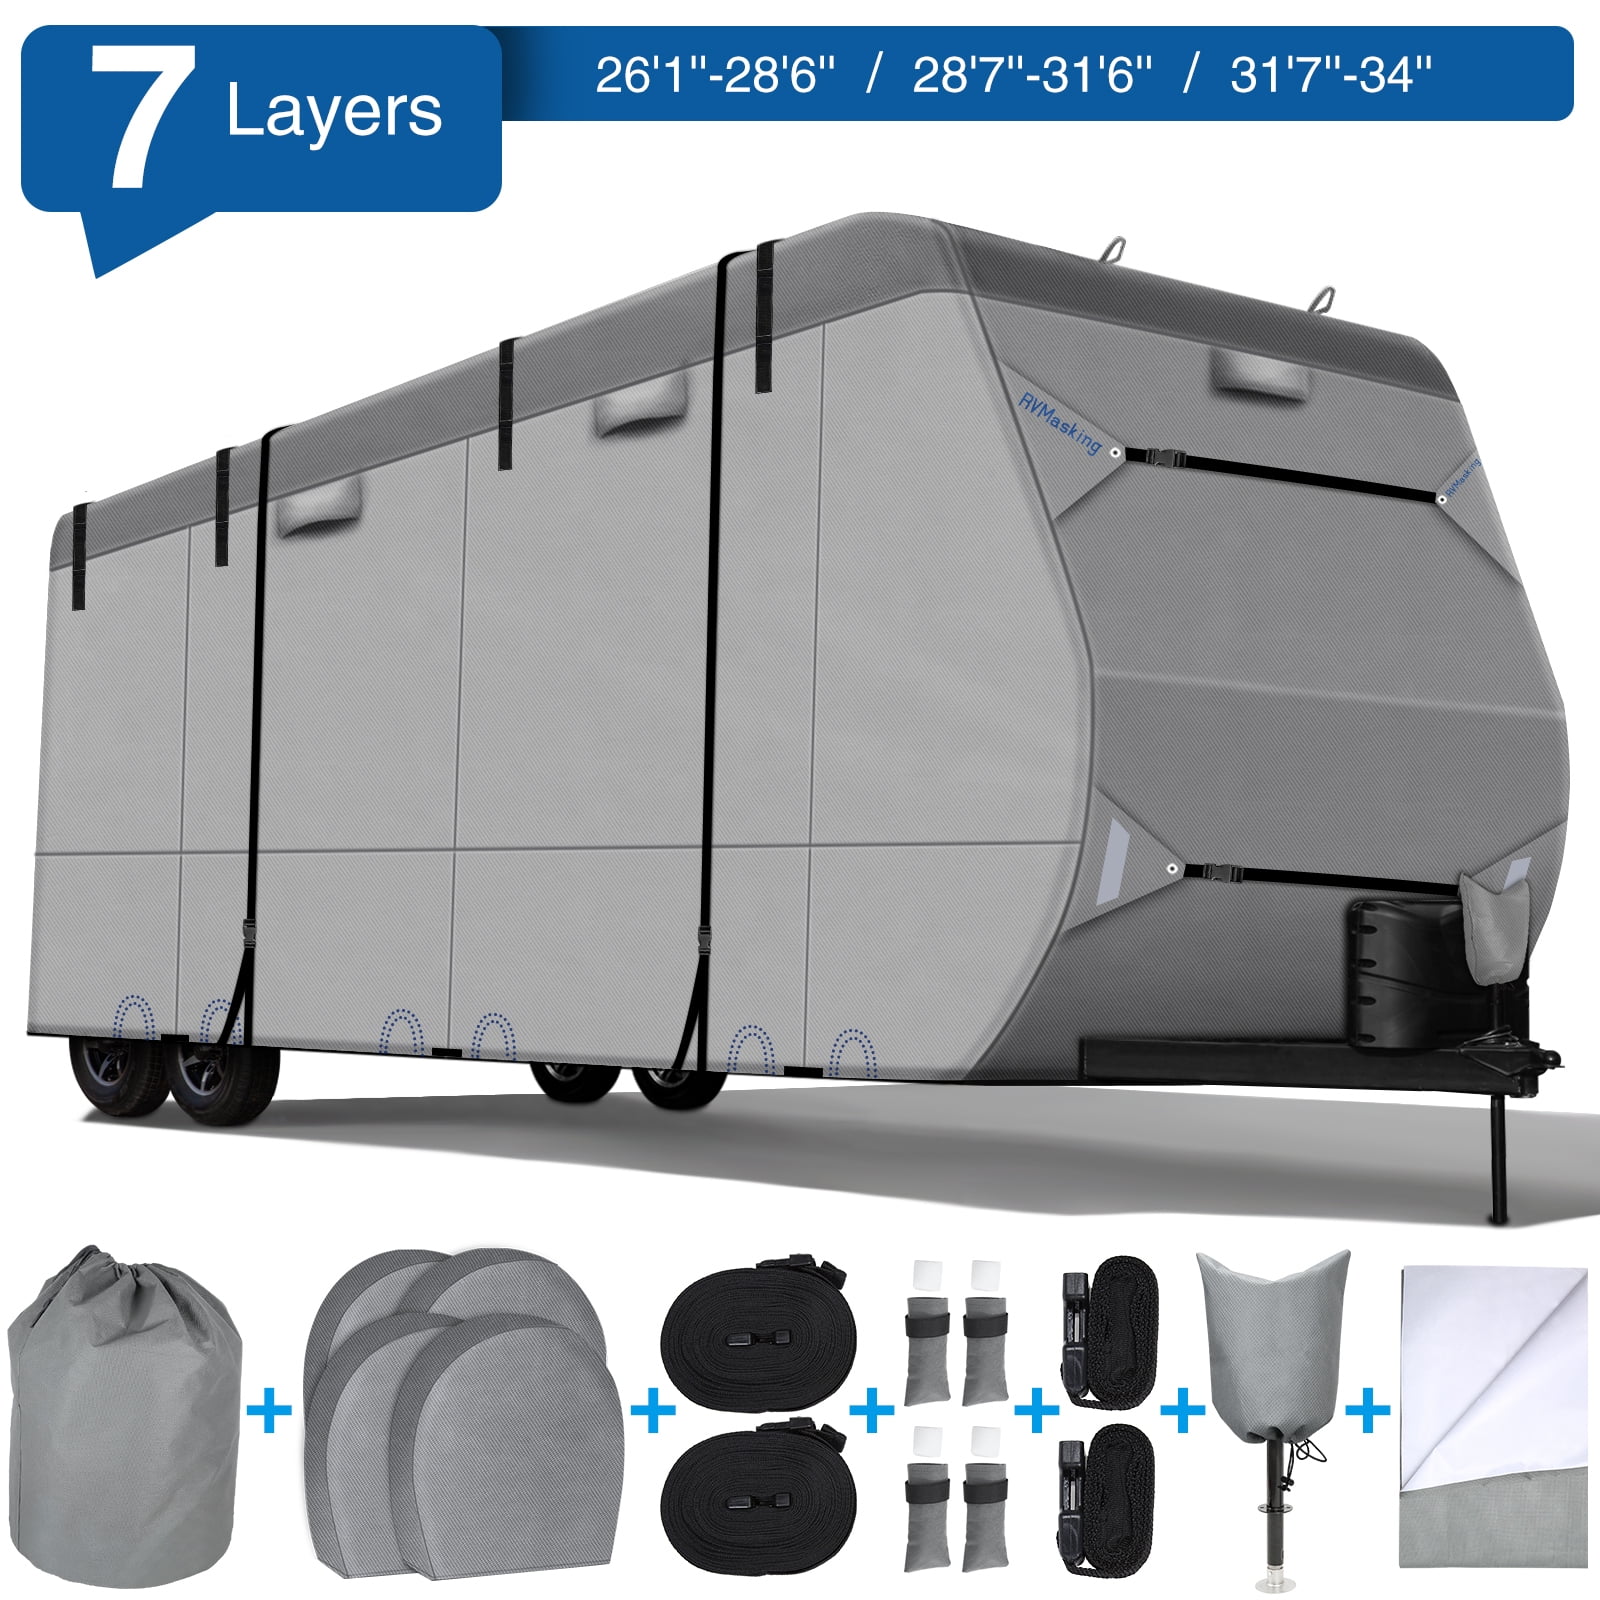 2Pcs Straps & Gutter Covers Fonzier 5 Layers Top Travel Trailer RV Cover Heavy Duty Camper Cover for 22'1-24' Motorhome Anti-UV Rip-Stop Breathable with Tongue Jack Cover 